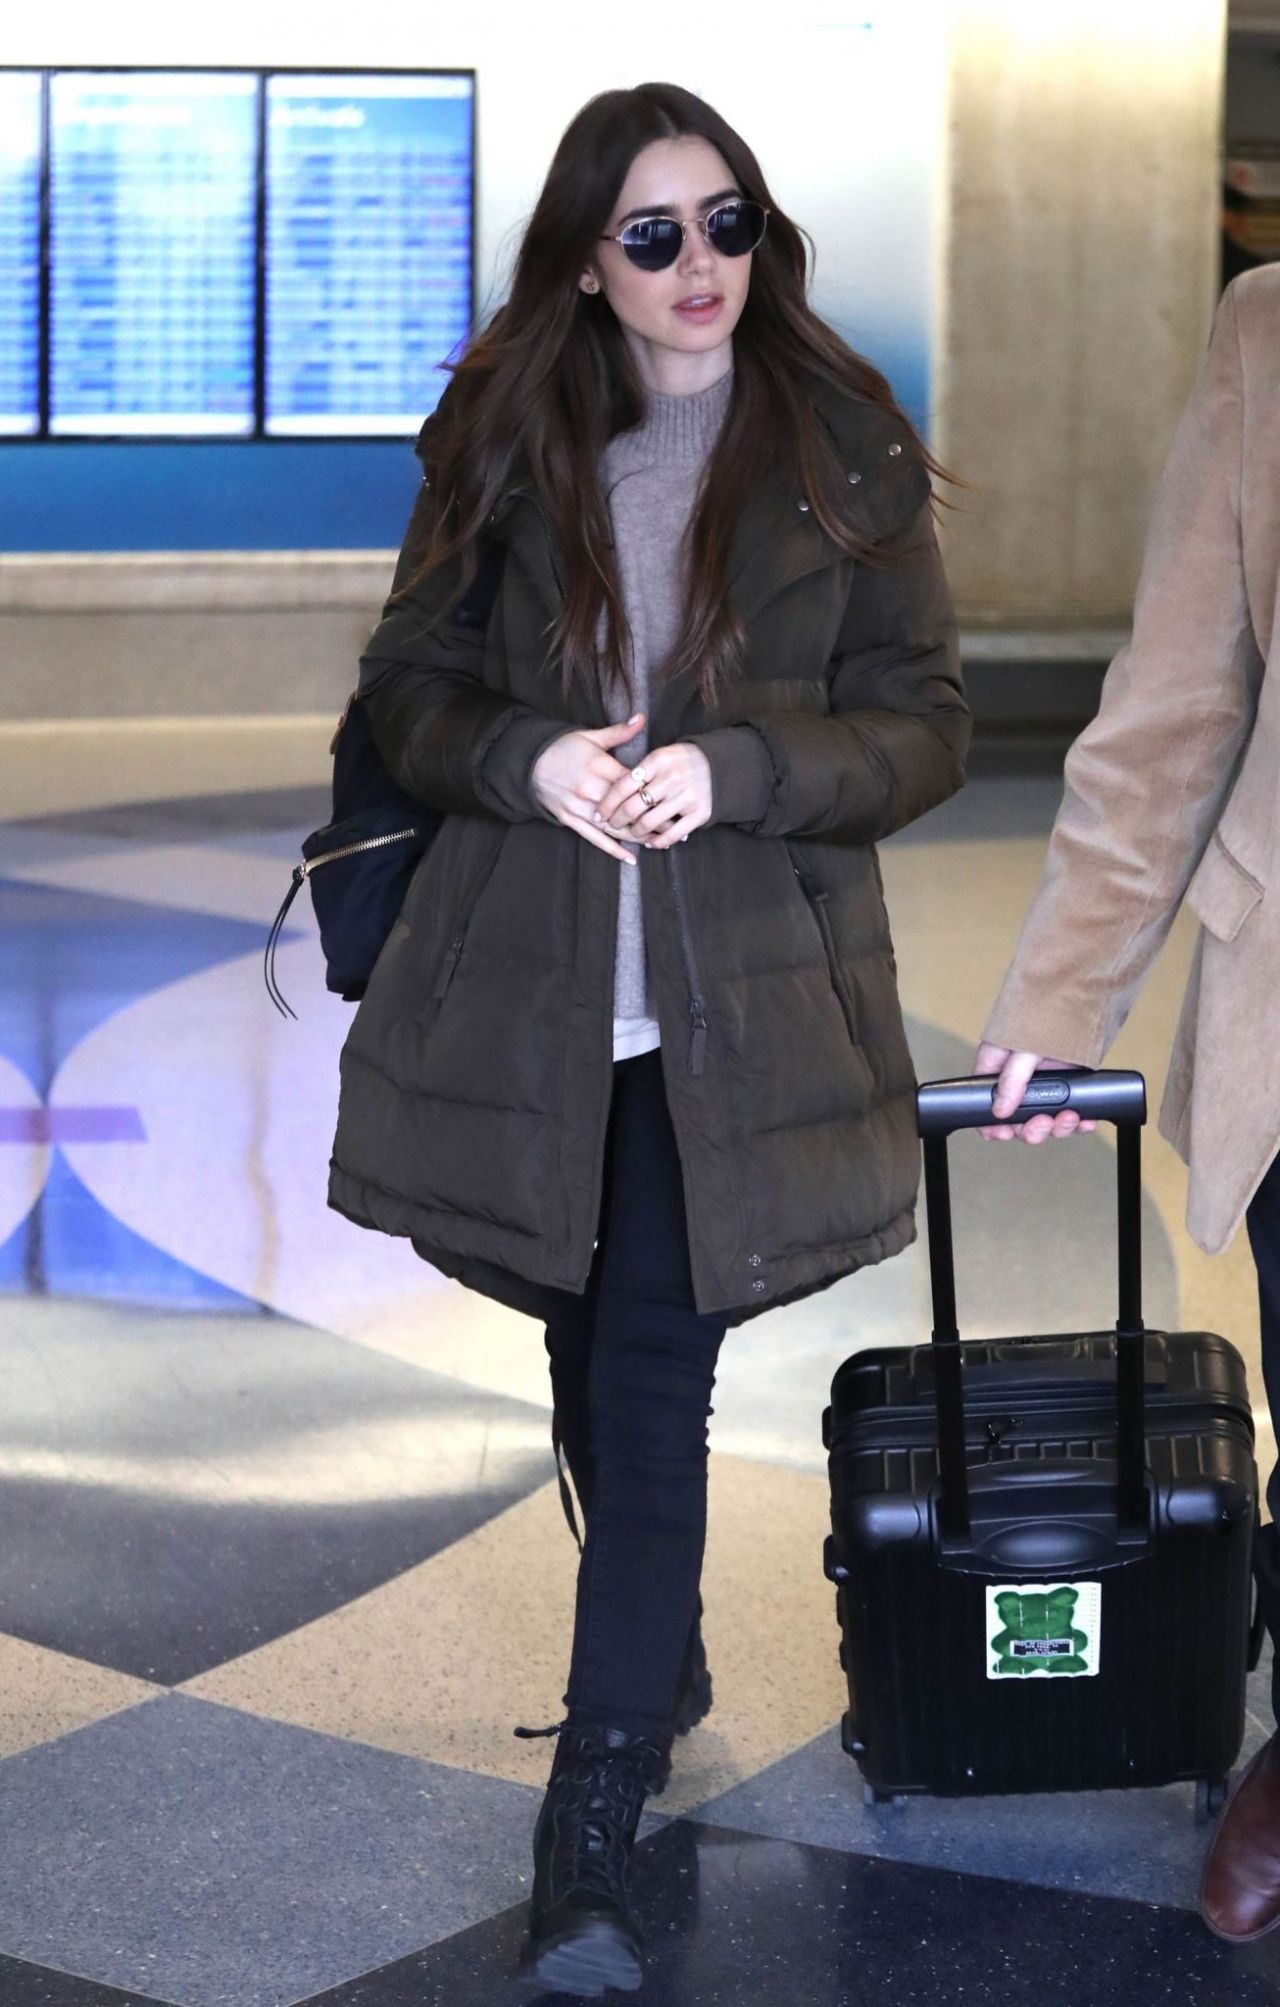 Lily Collins in Comfy Travel Outfit - LAX Airport 11/21/2019 • CelebMafia